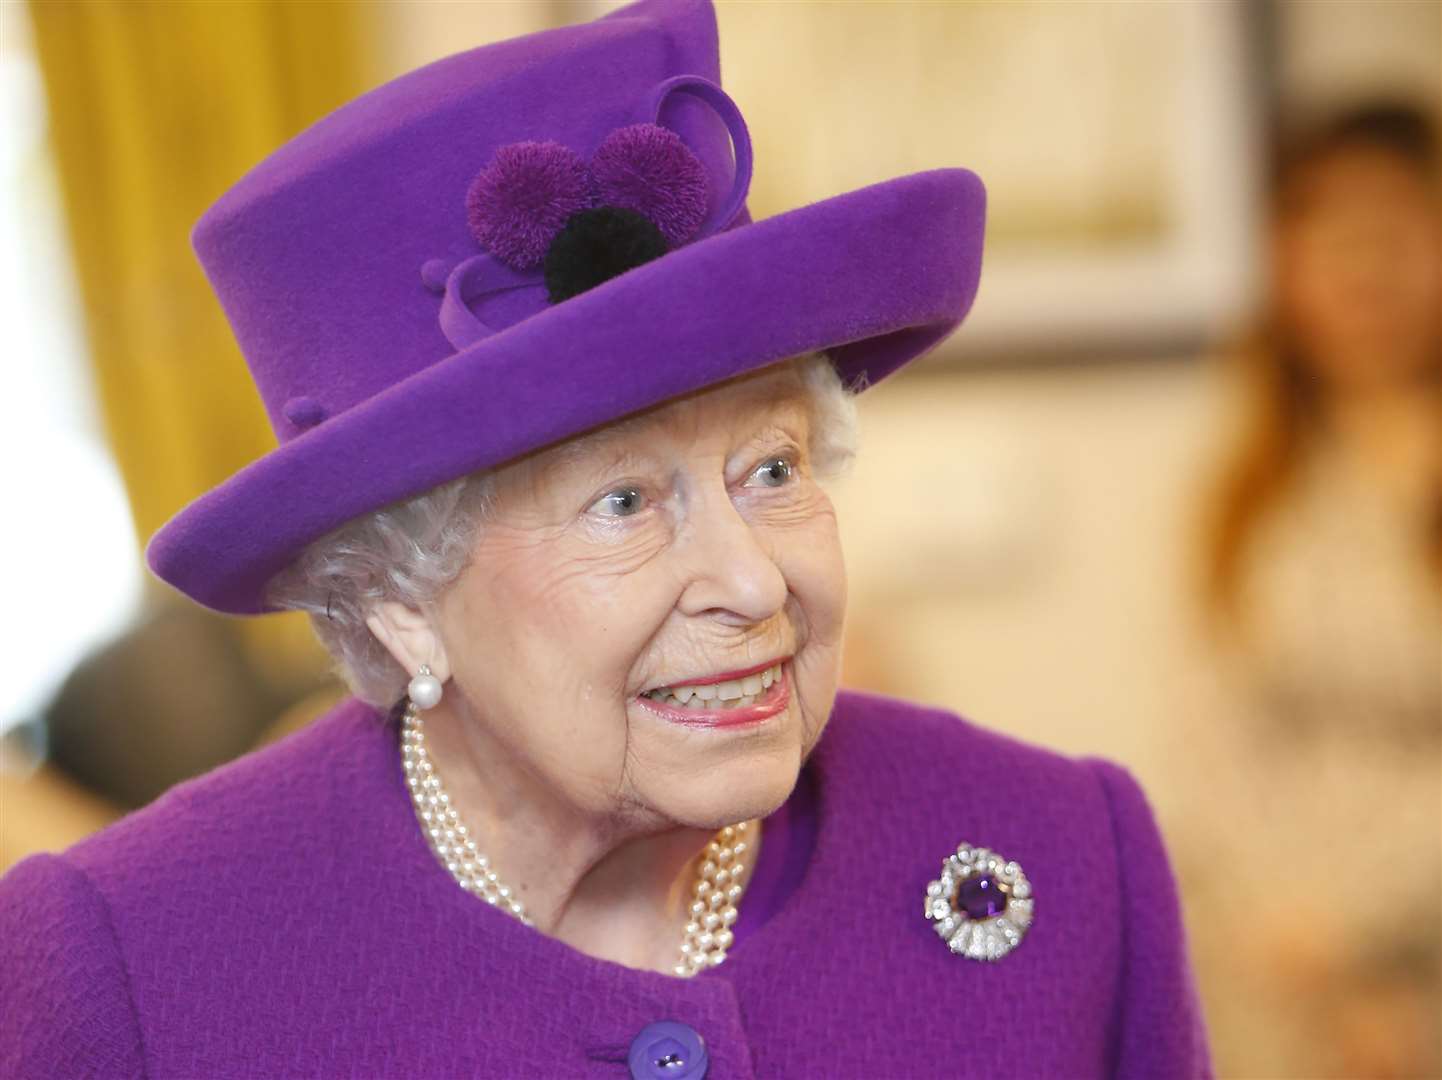 More than 620 street parties were held for the Queen last year